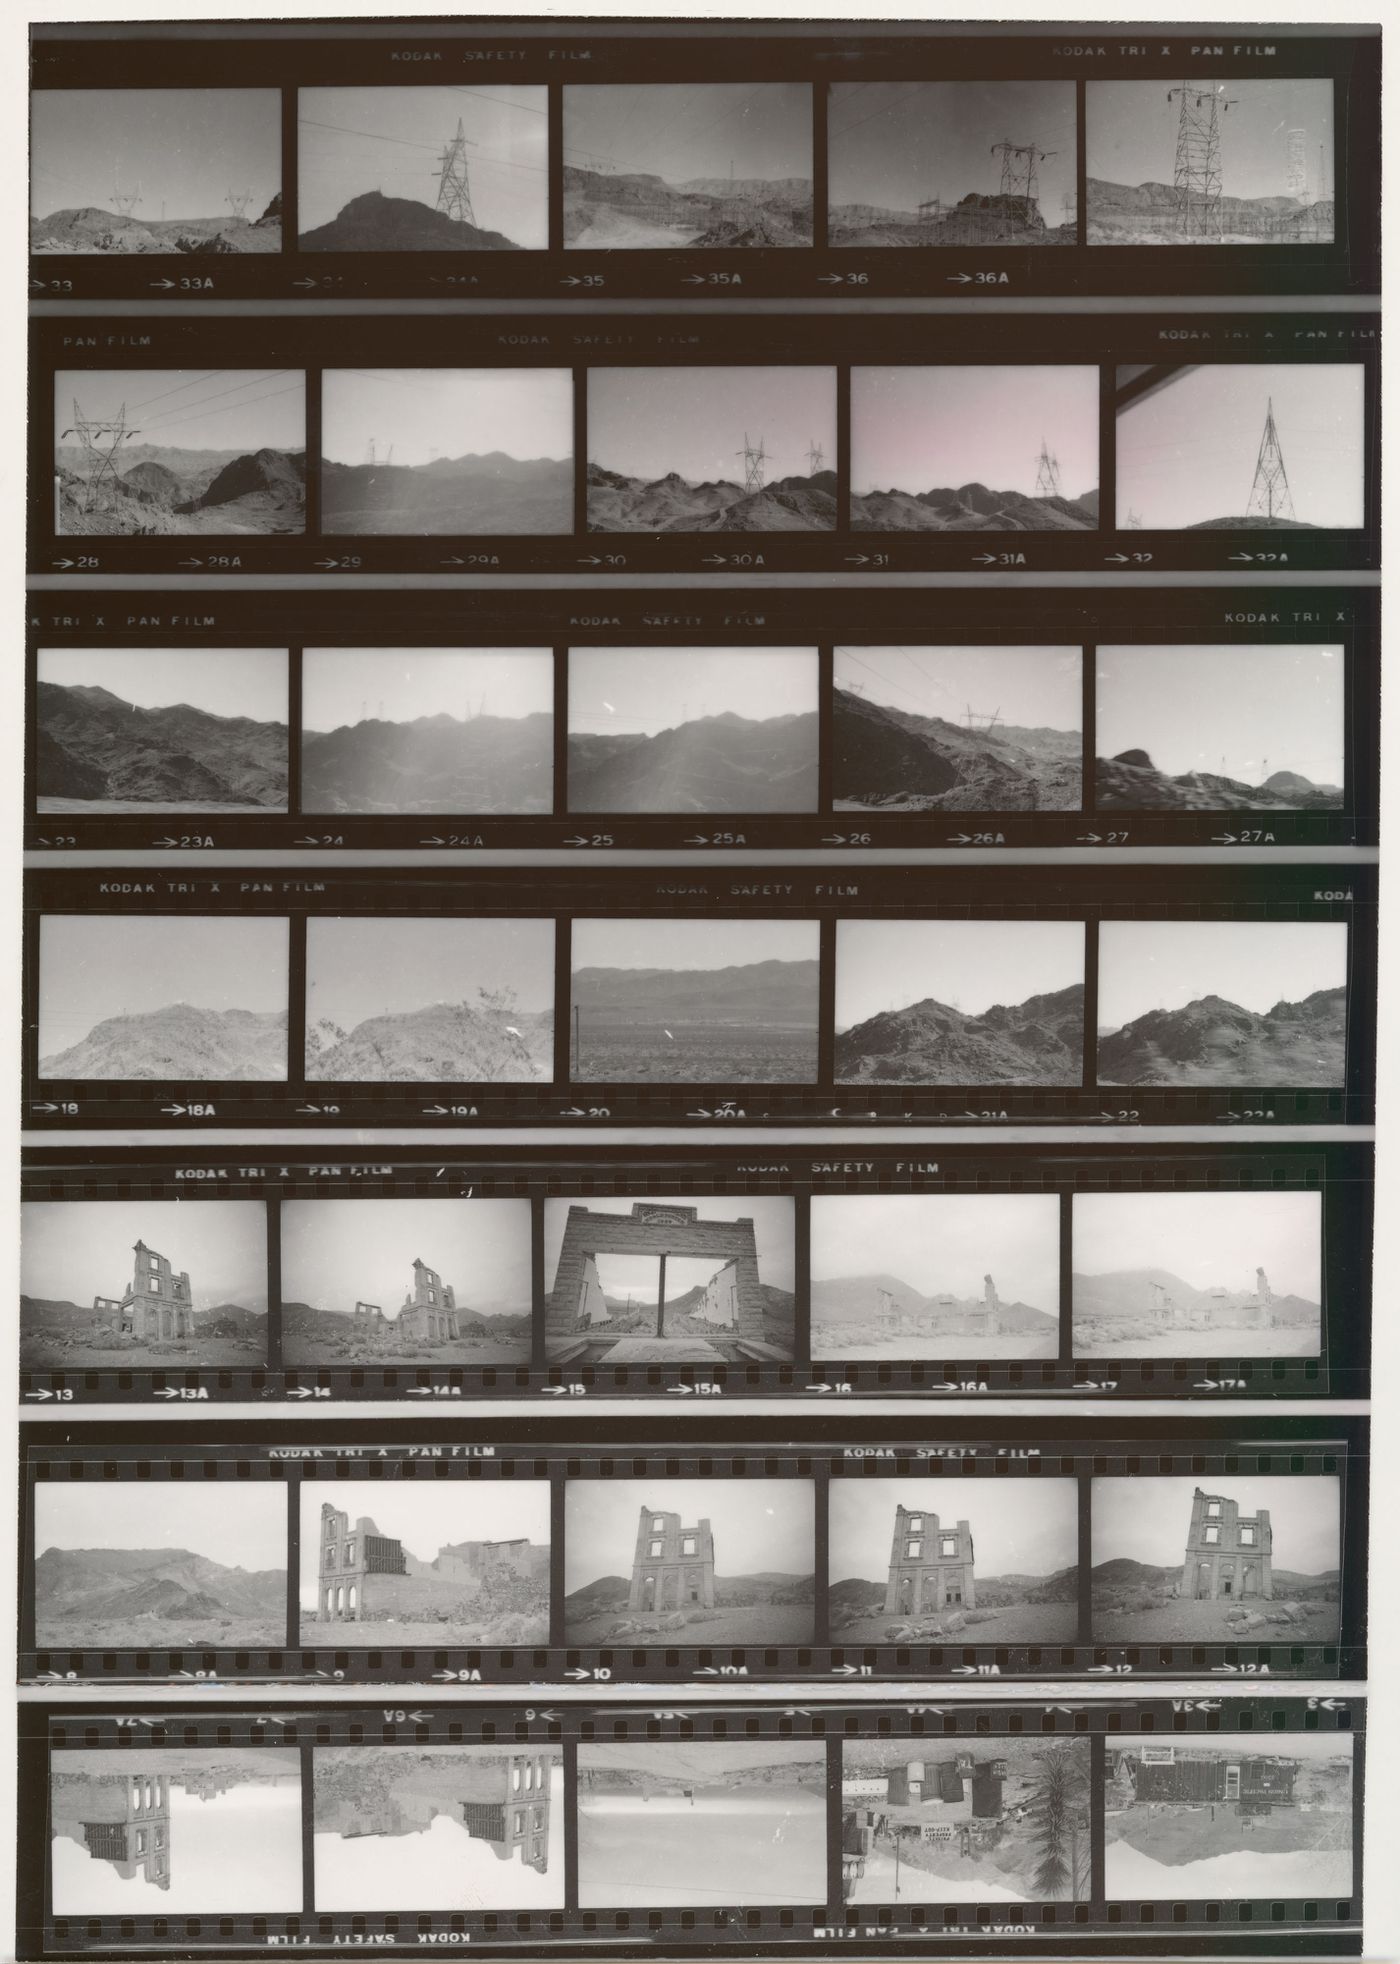 Contact sheet of transmission towers, landscape views and buildings in ruin, Western United States